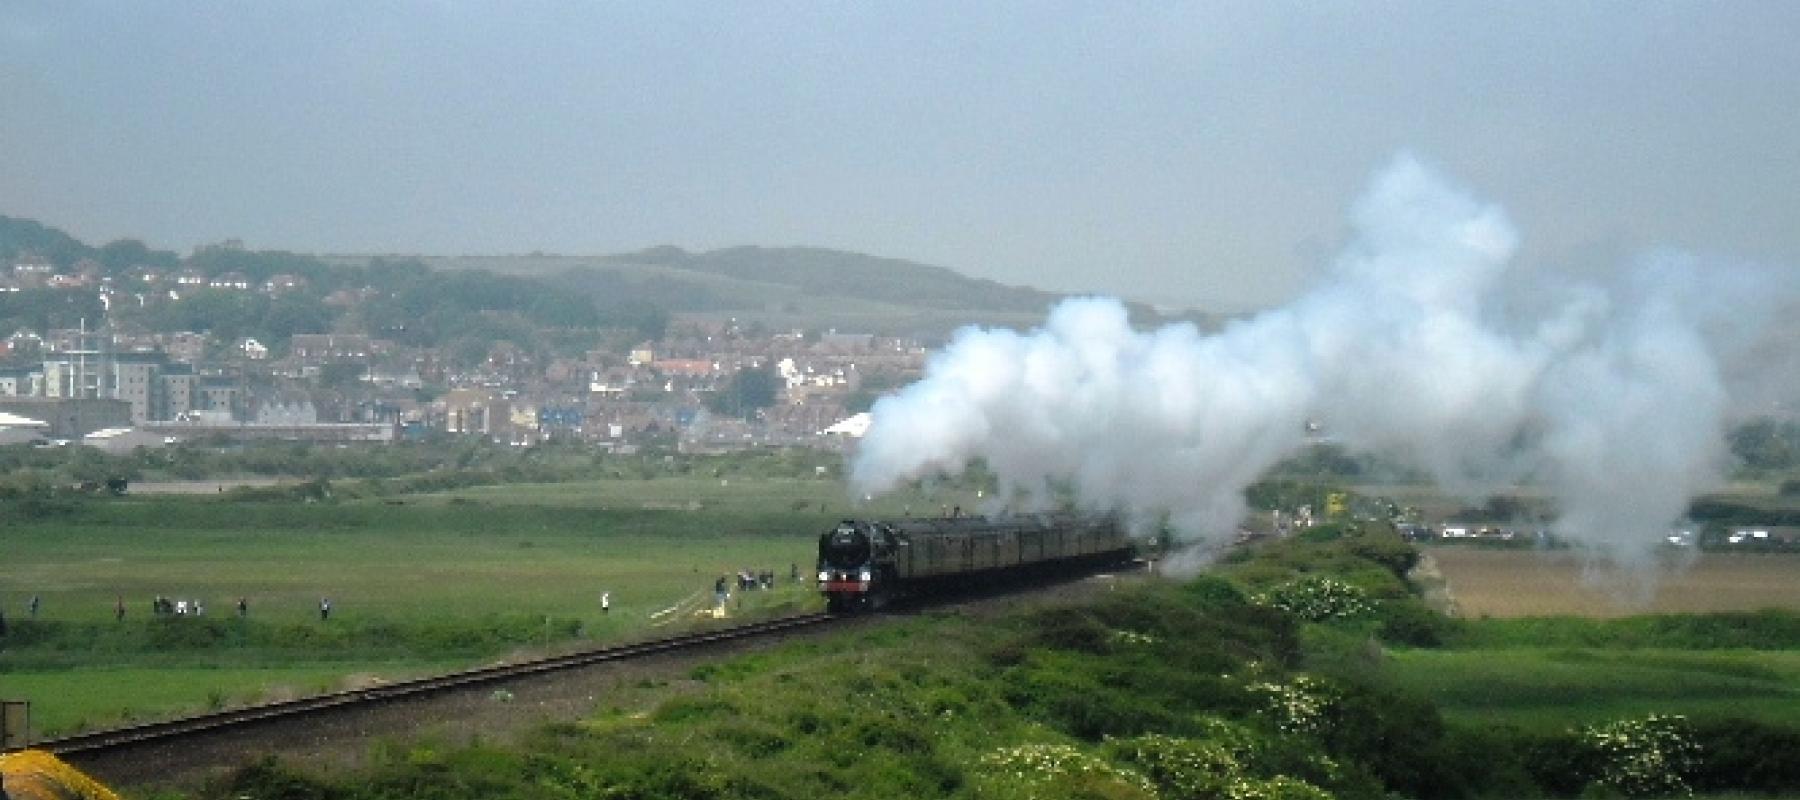 Oliver Cromwell steam engine approaching Seaford for 150th celebrations